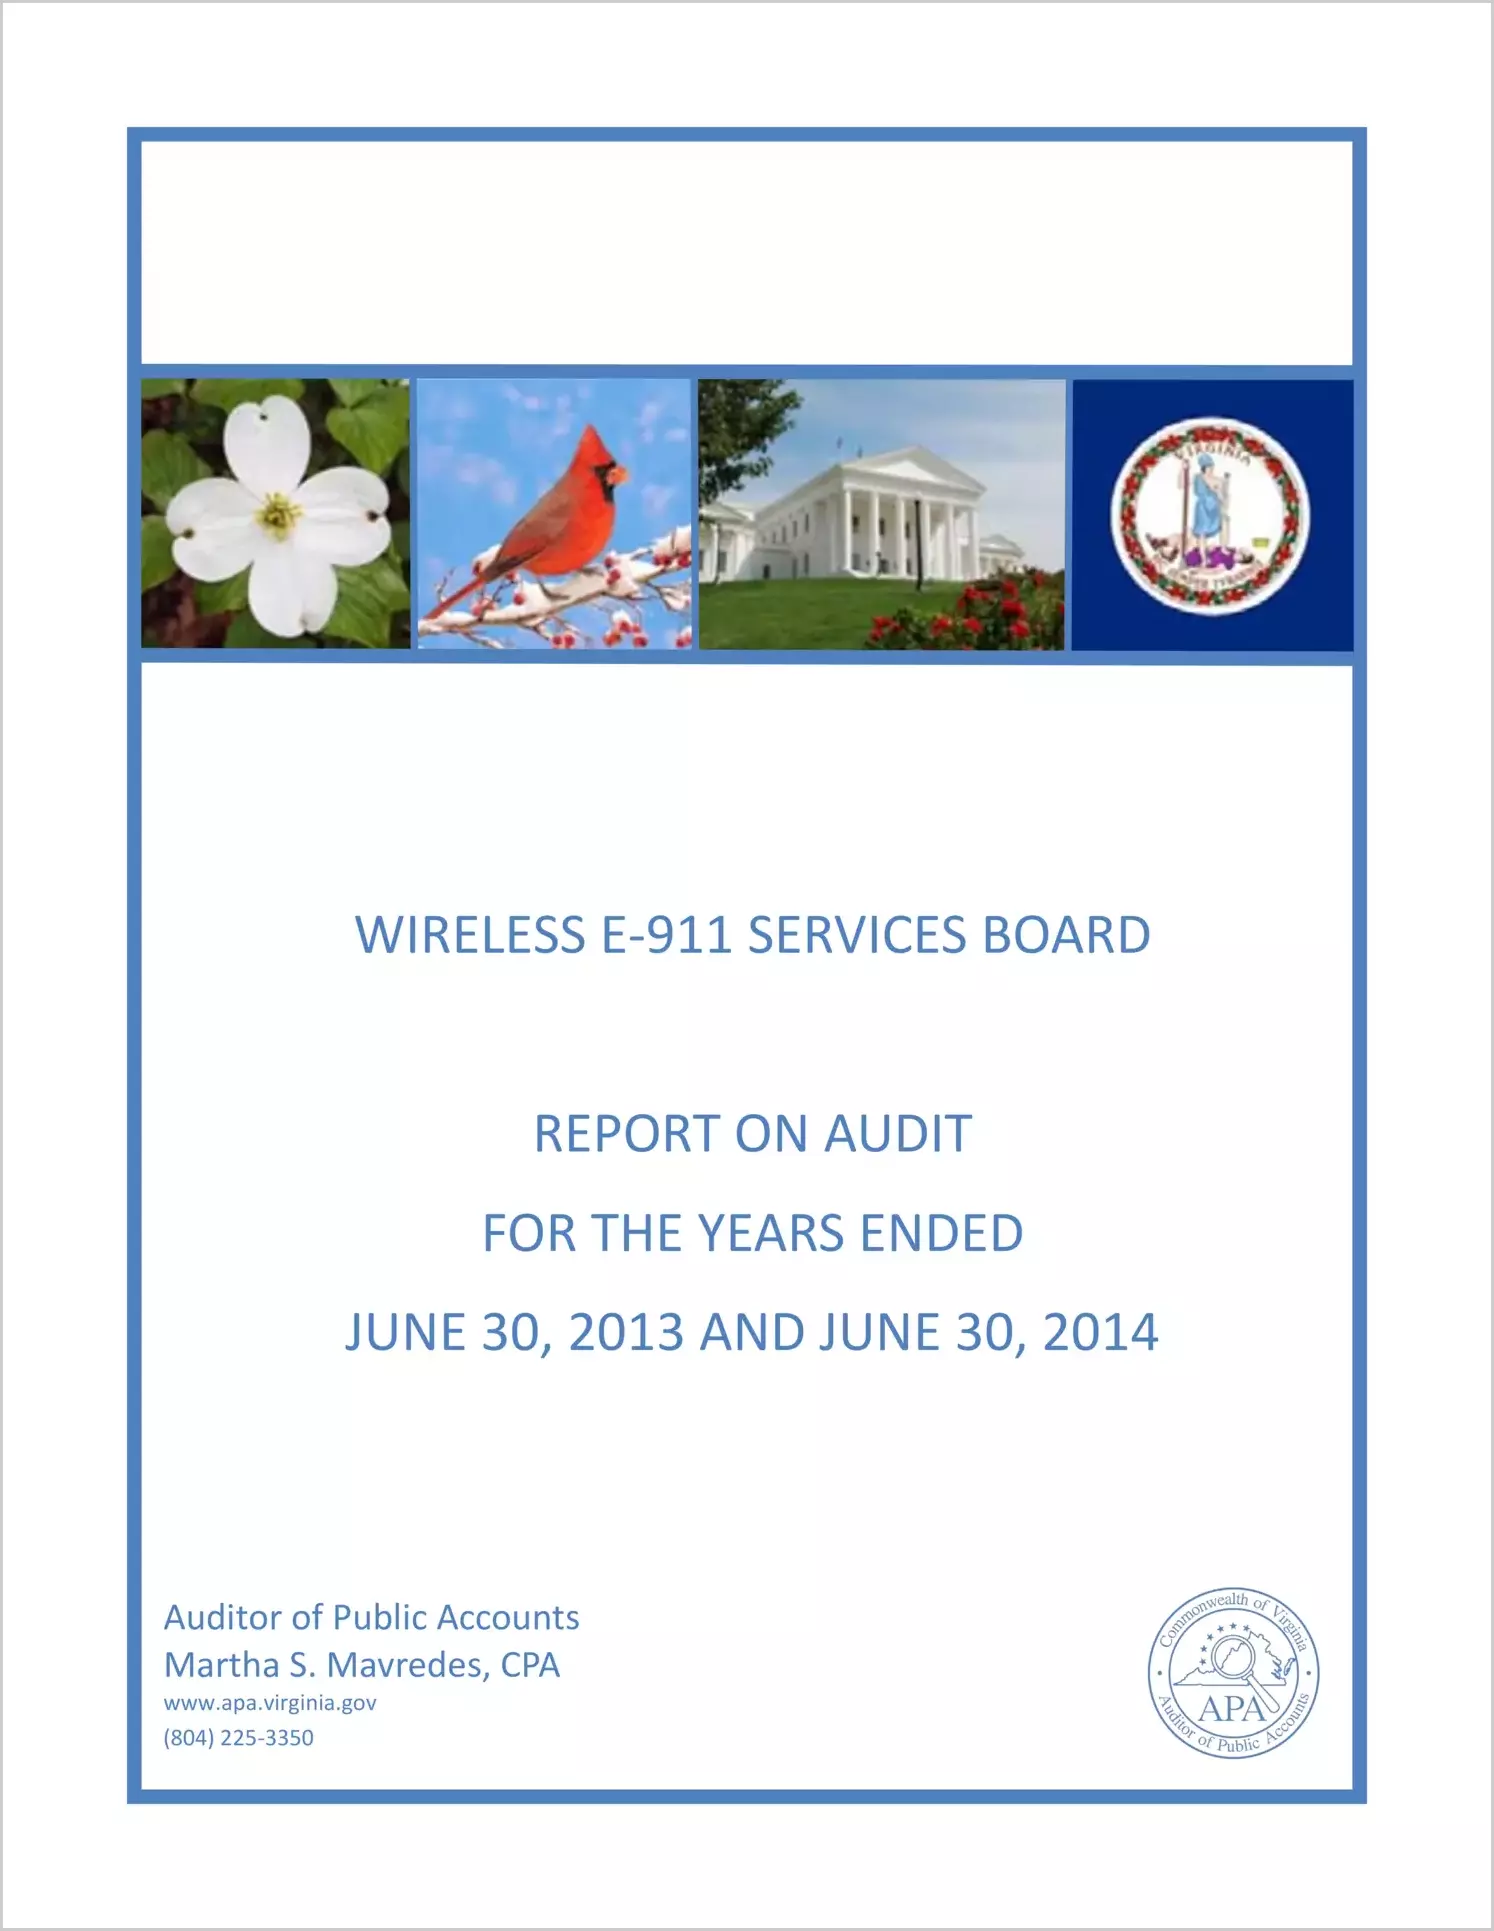 Wireless E-911 Services Board report on audit for the years ended June 30, 2013 and June 30, 2014